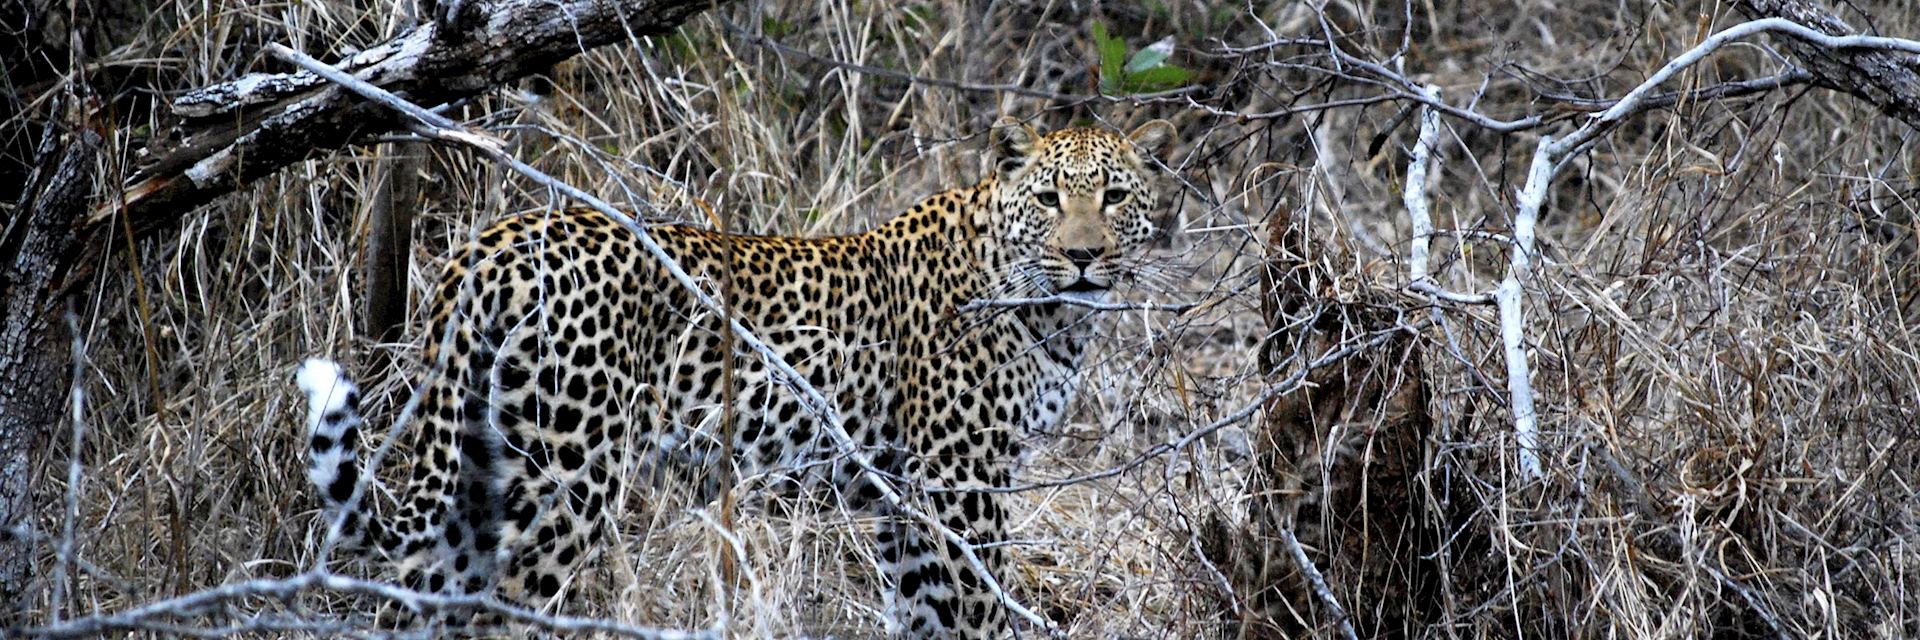 Leopard, Kwandwe Private Game Reserve